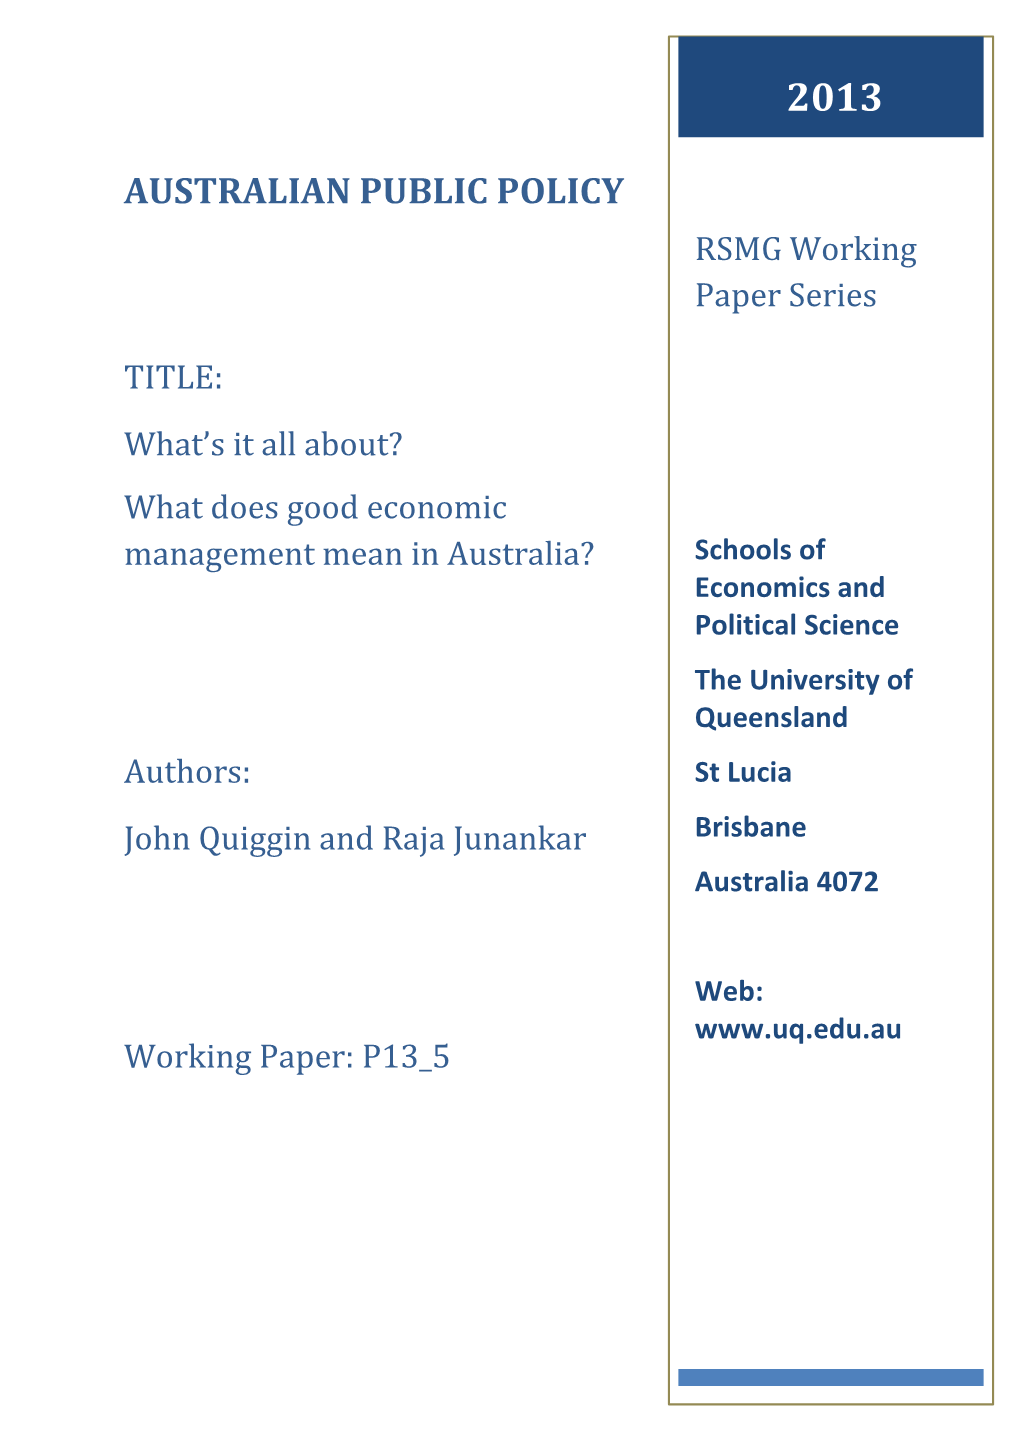 AUSTRALIAN PUBLIC POLICY RSMG2011 Working Paper Series